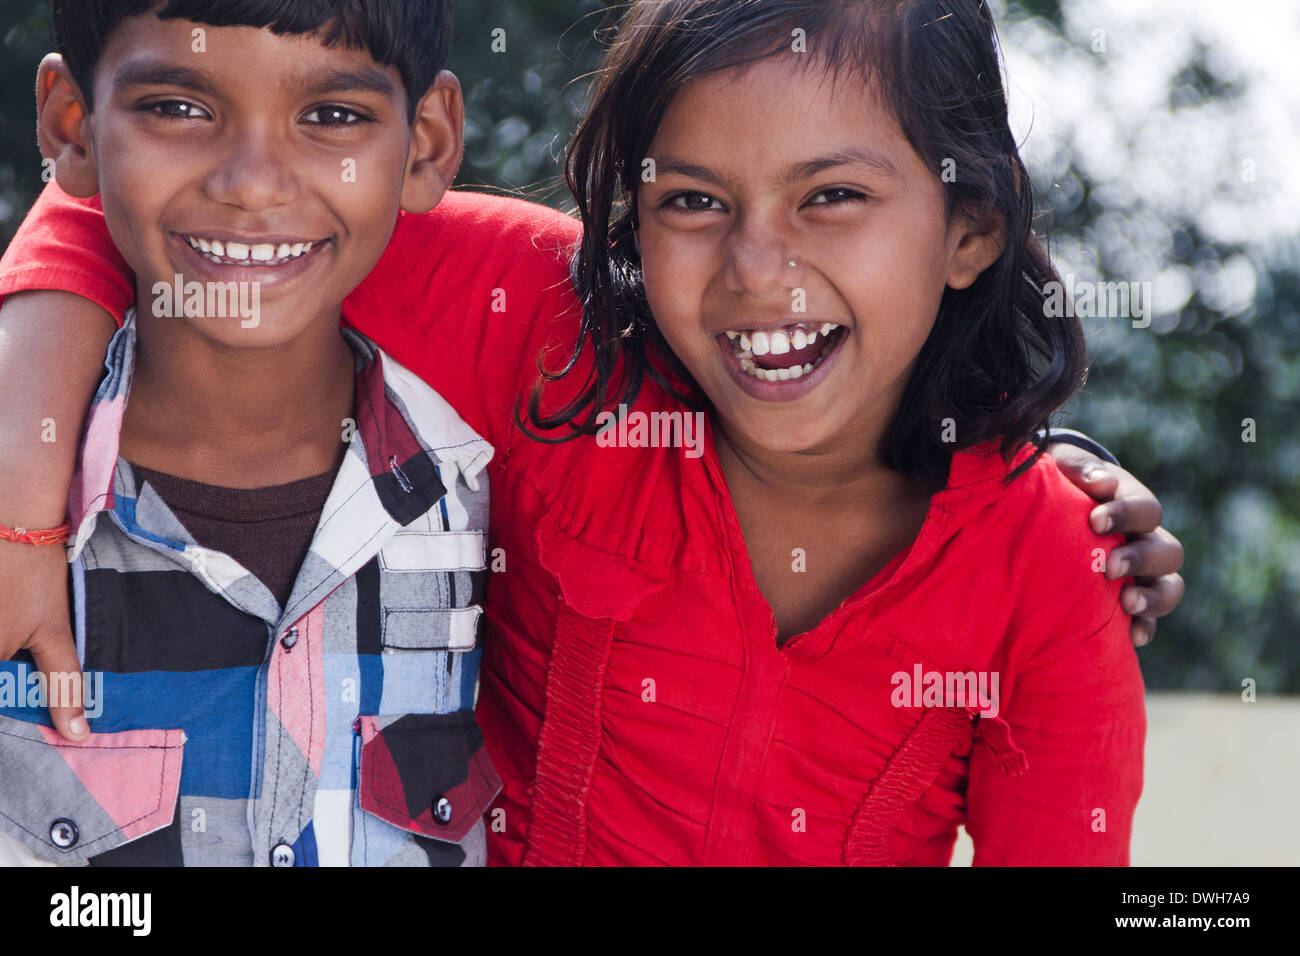 Indian kids standing and playful Stock Photo